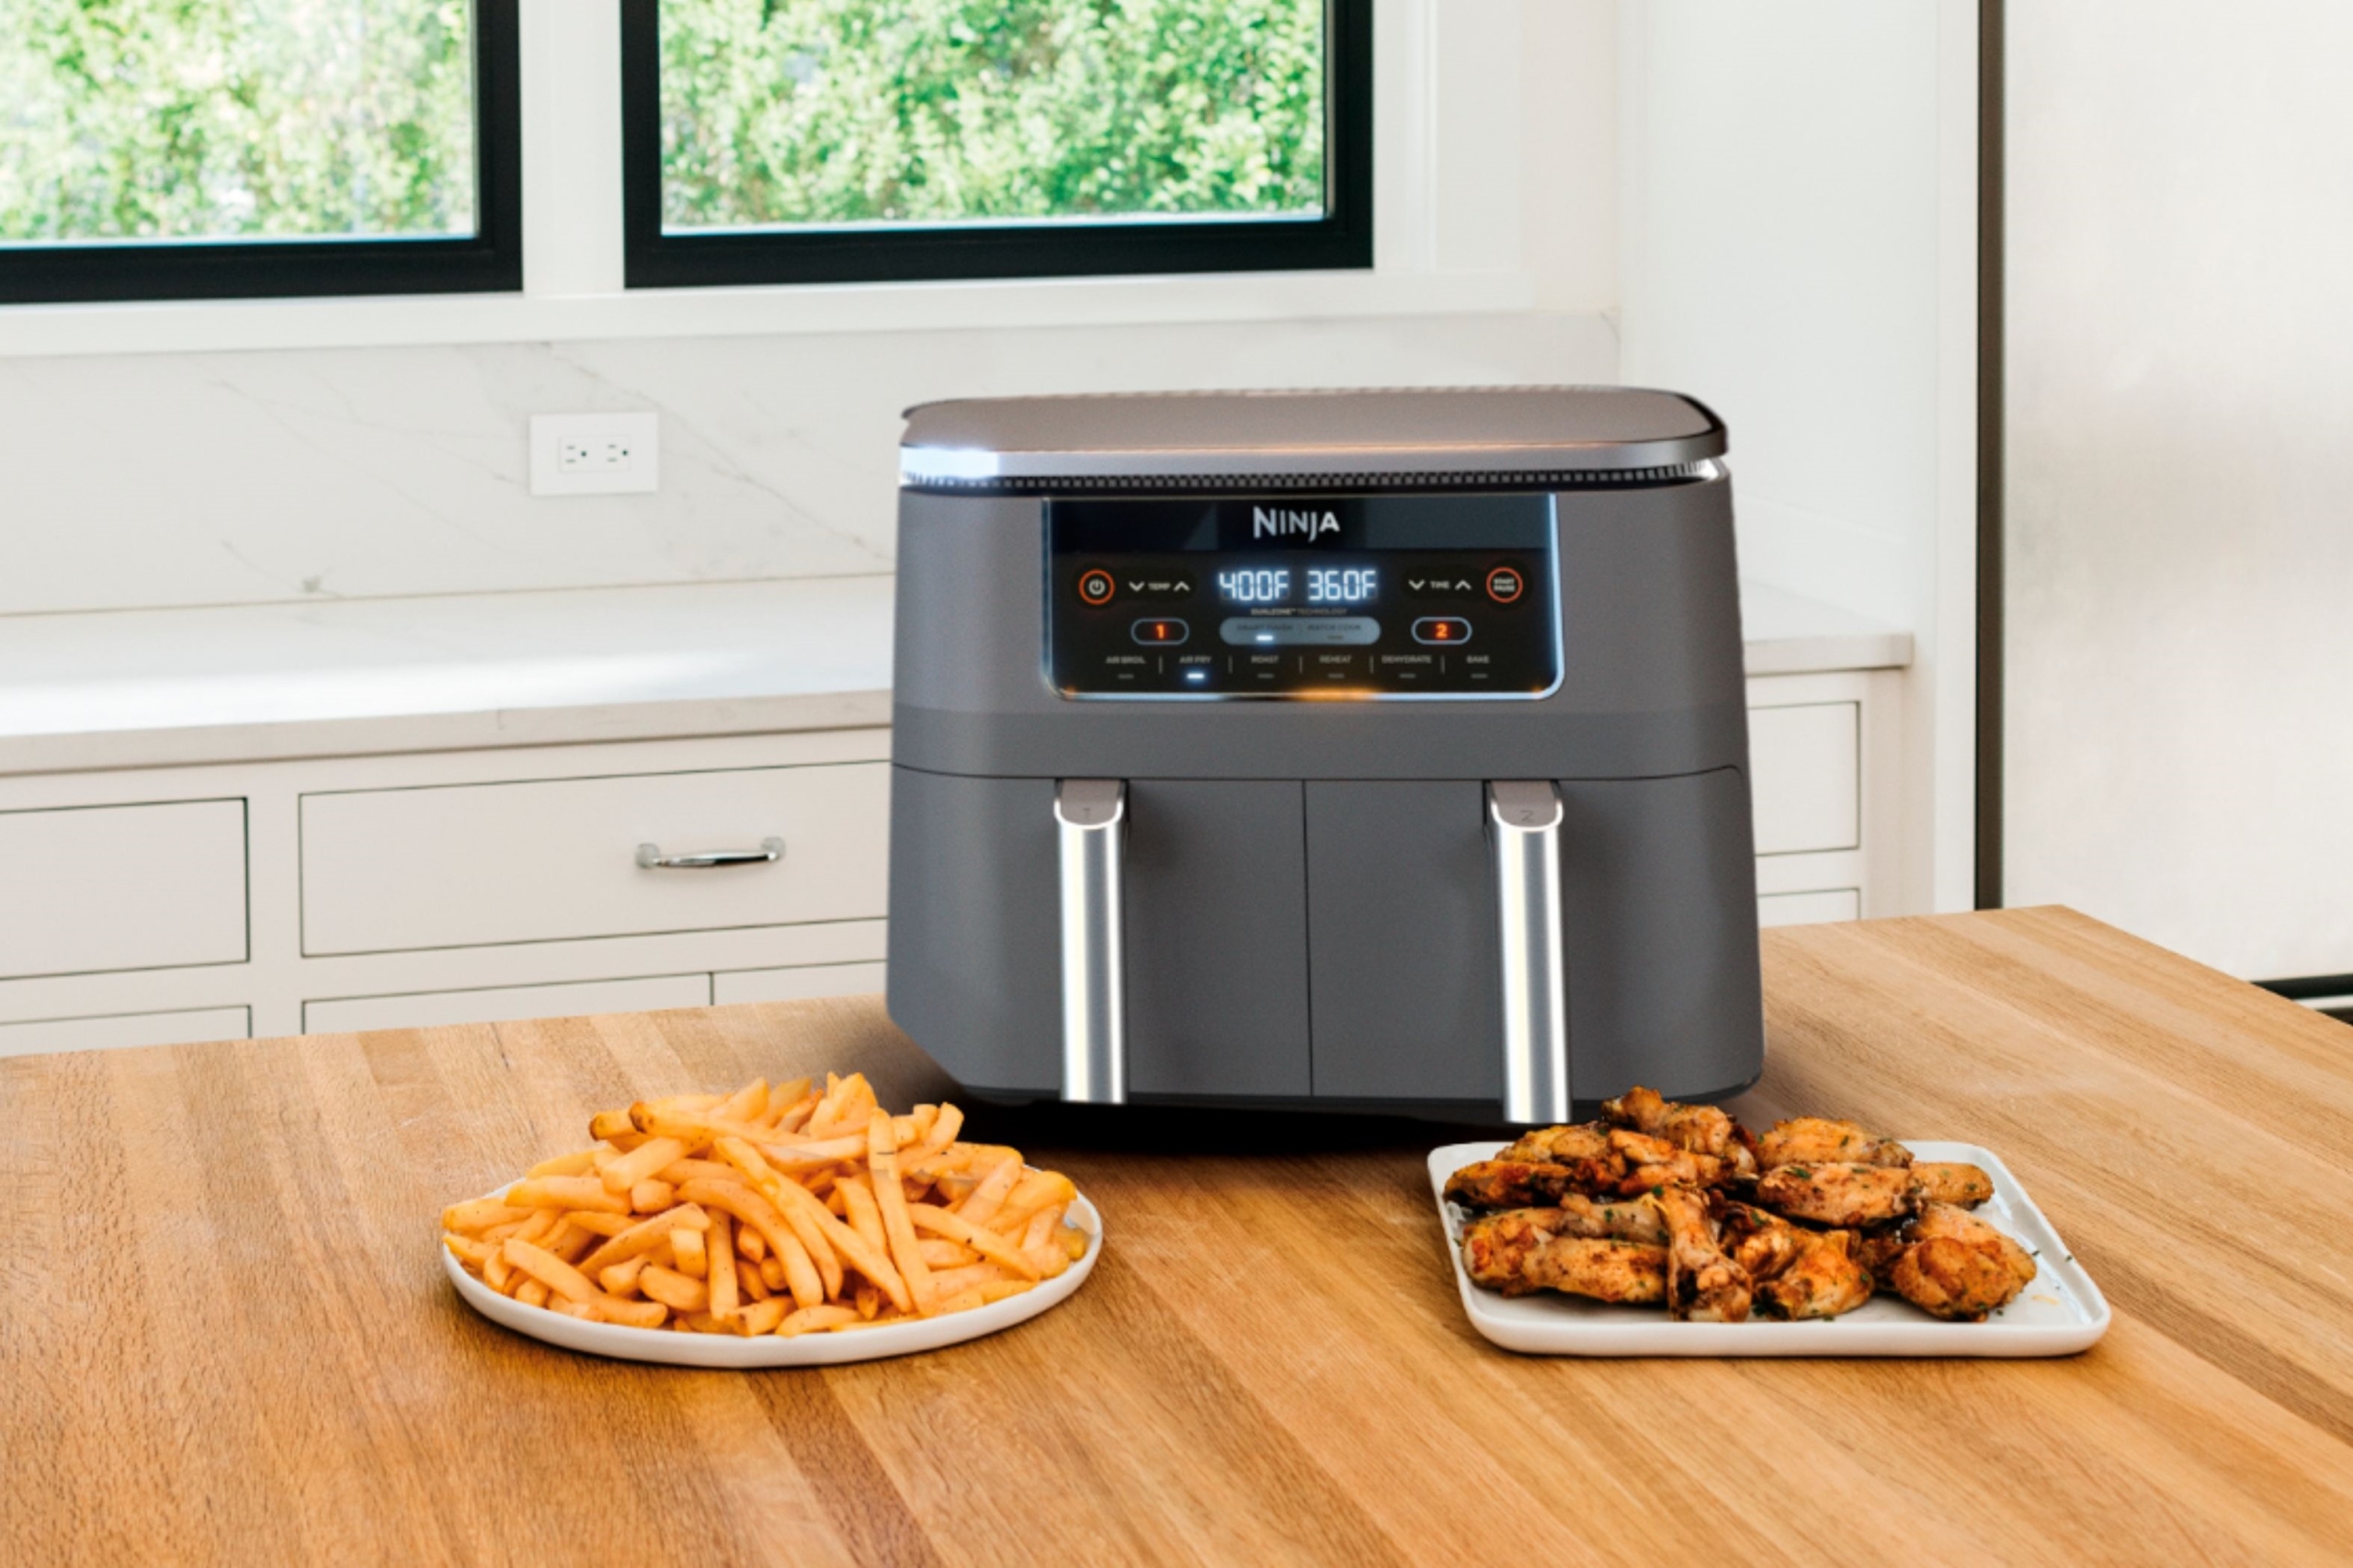 BUDDY GROUP] KOOC Large Air Fryer with Accessories, 4.5-Quart